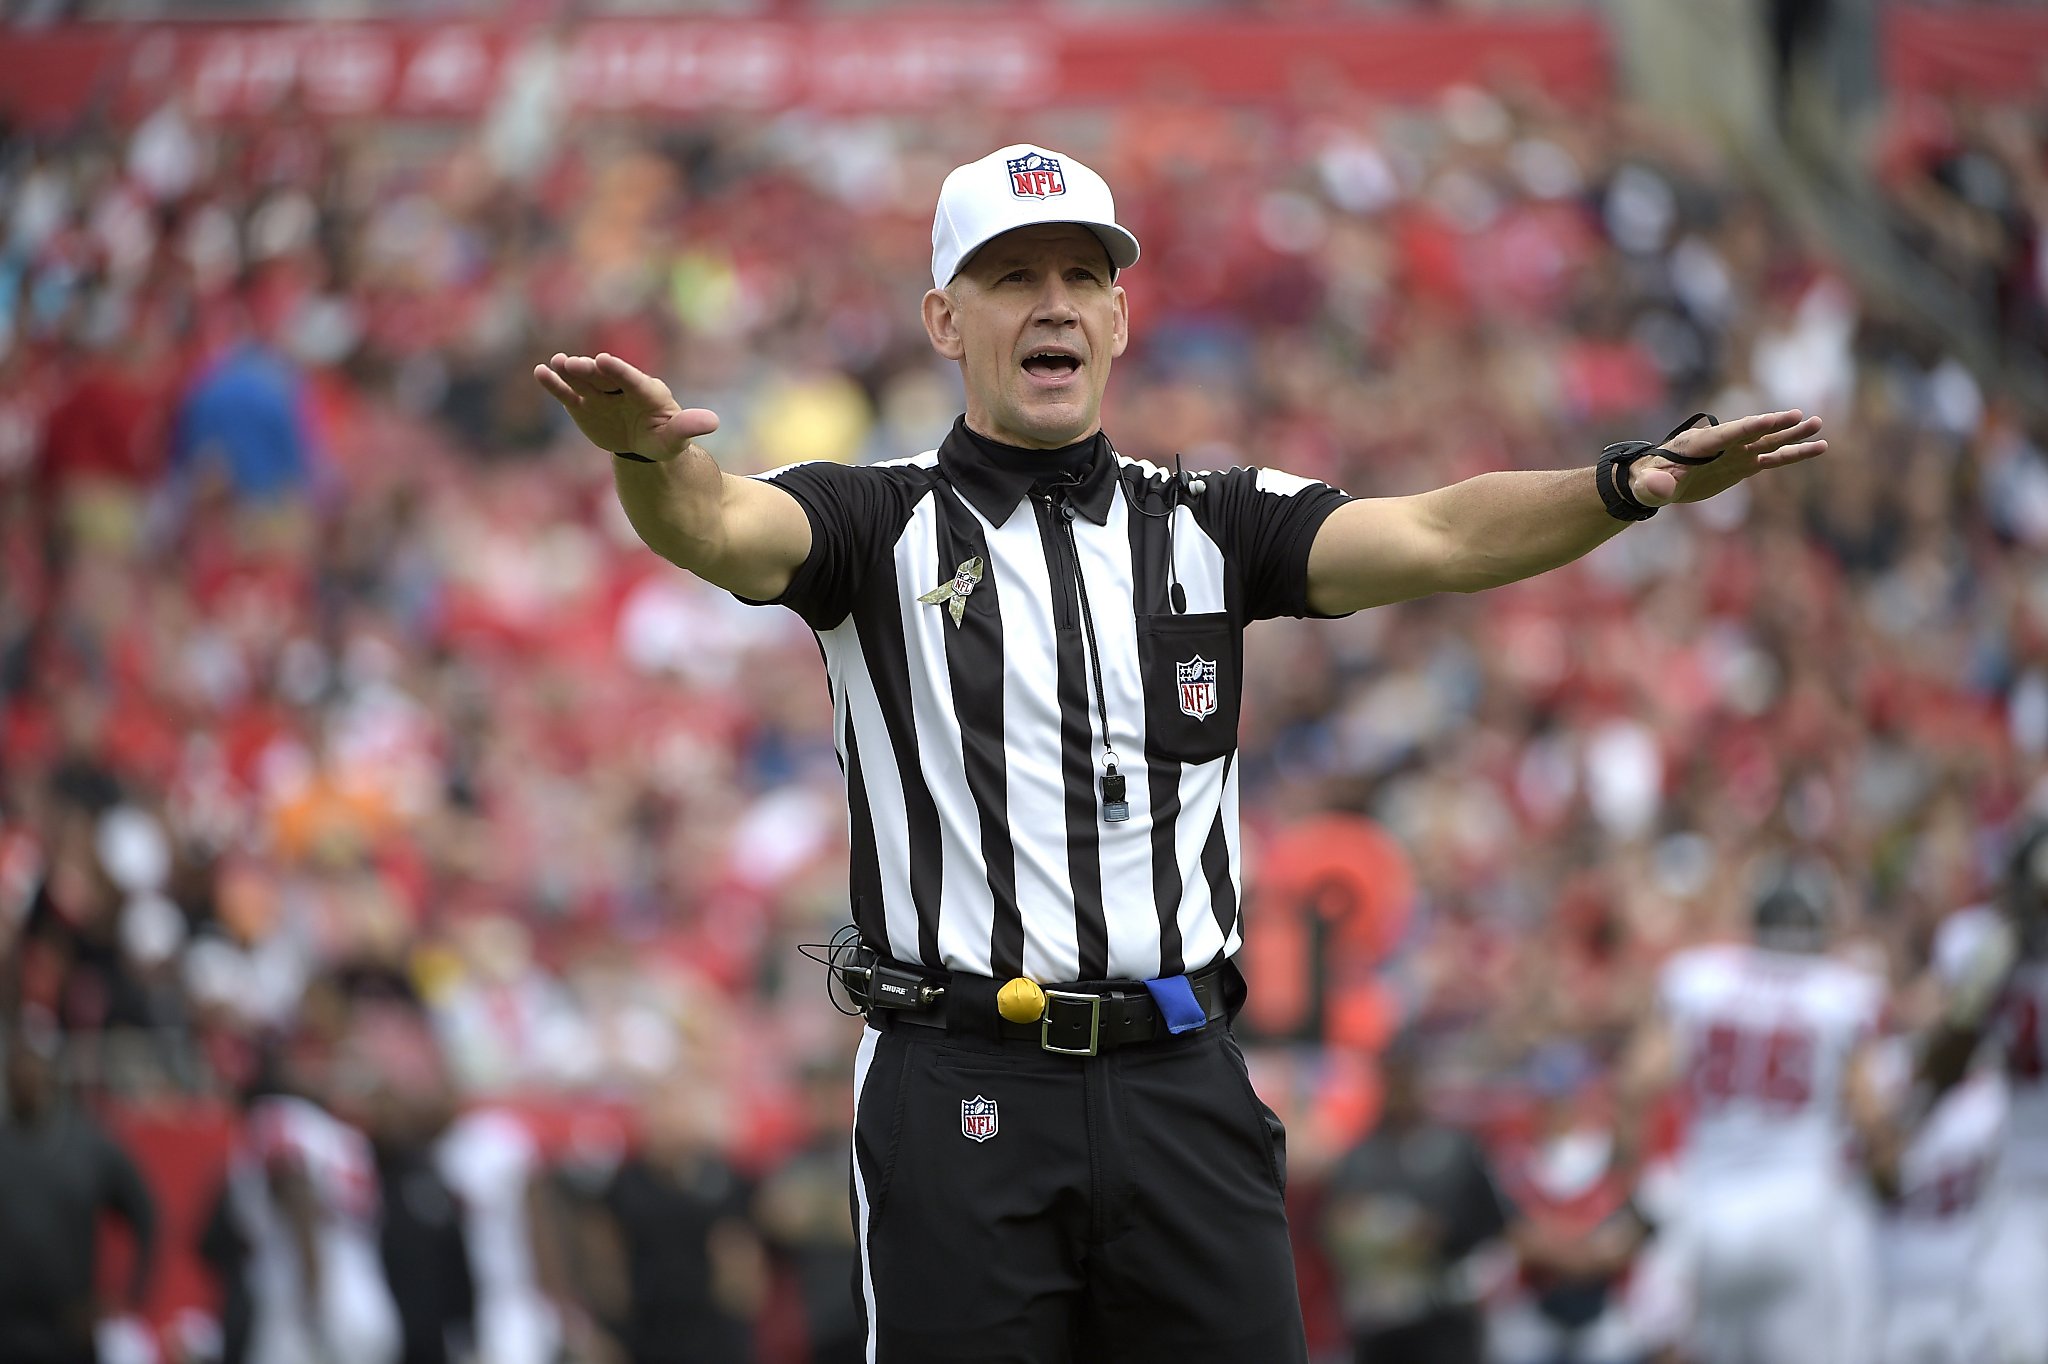 refs-have-to-really-make-the-grade-to-officiate-super-bowl-san